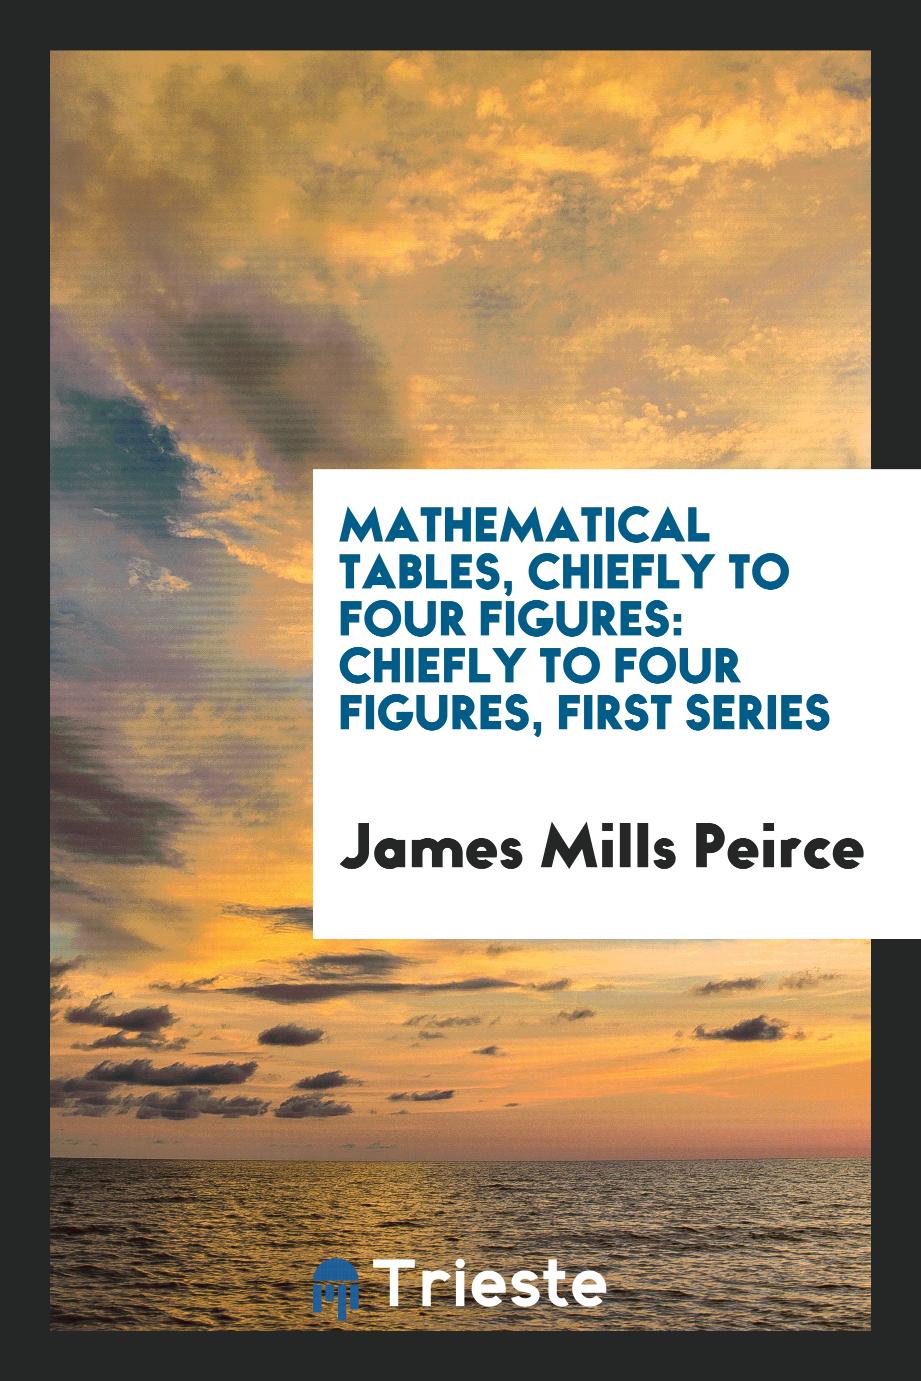 Mathematical Tables, Chiefly to Four Figures: Chiefly to Four Figures, first series